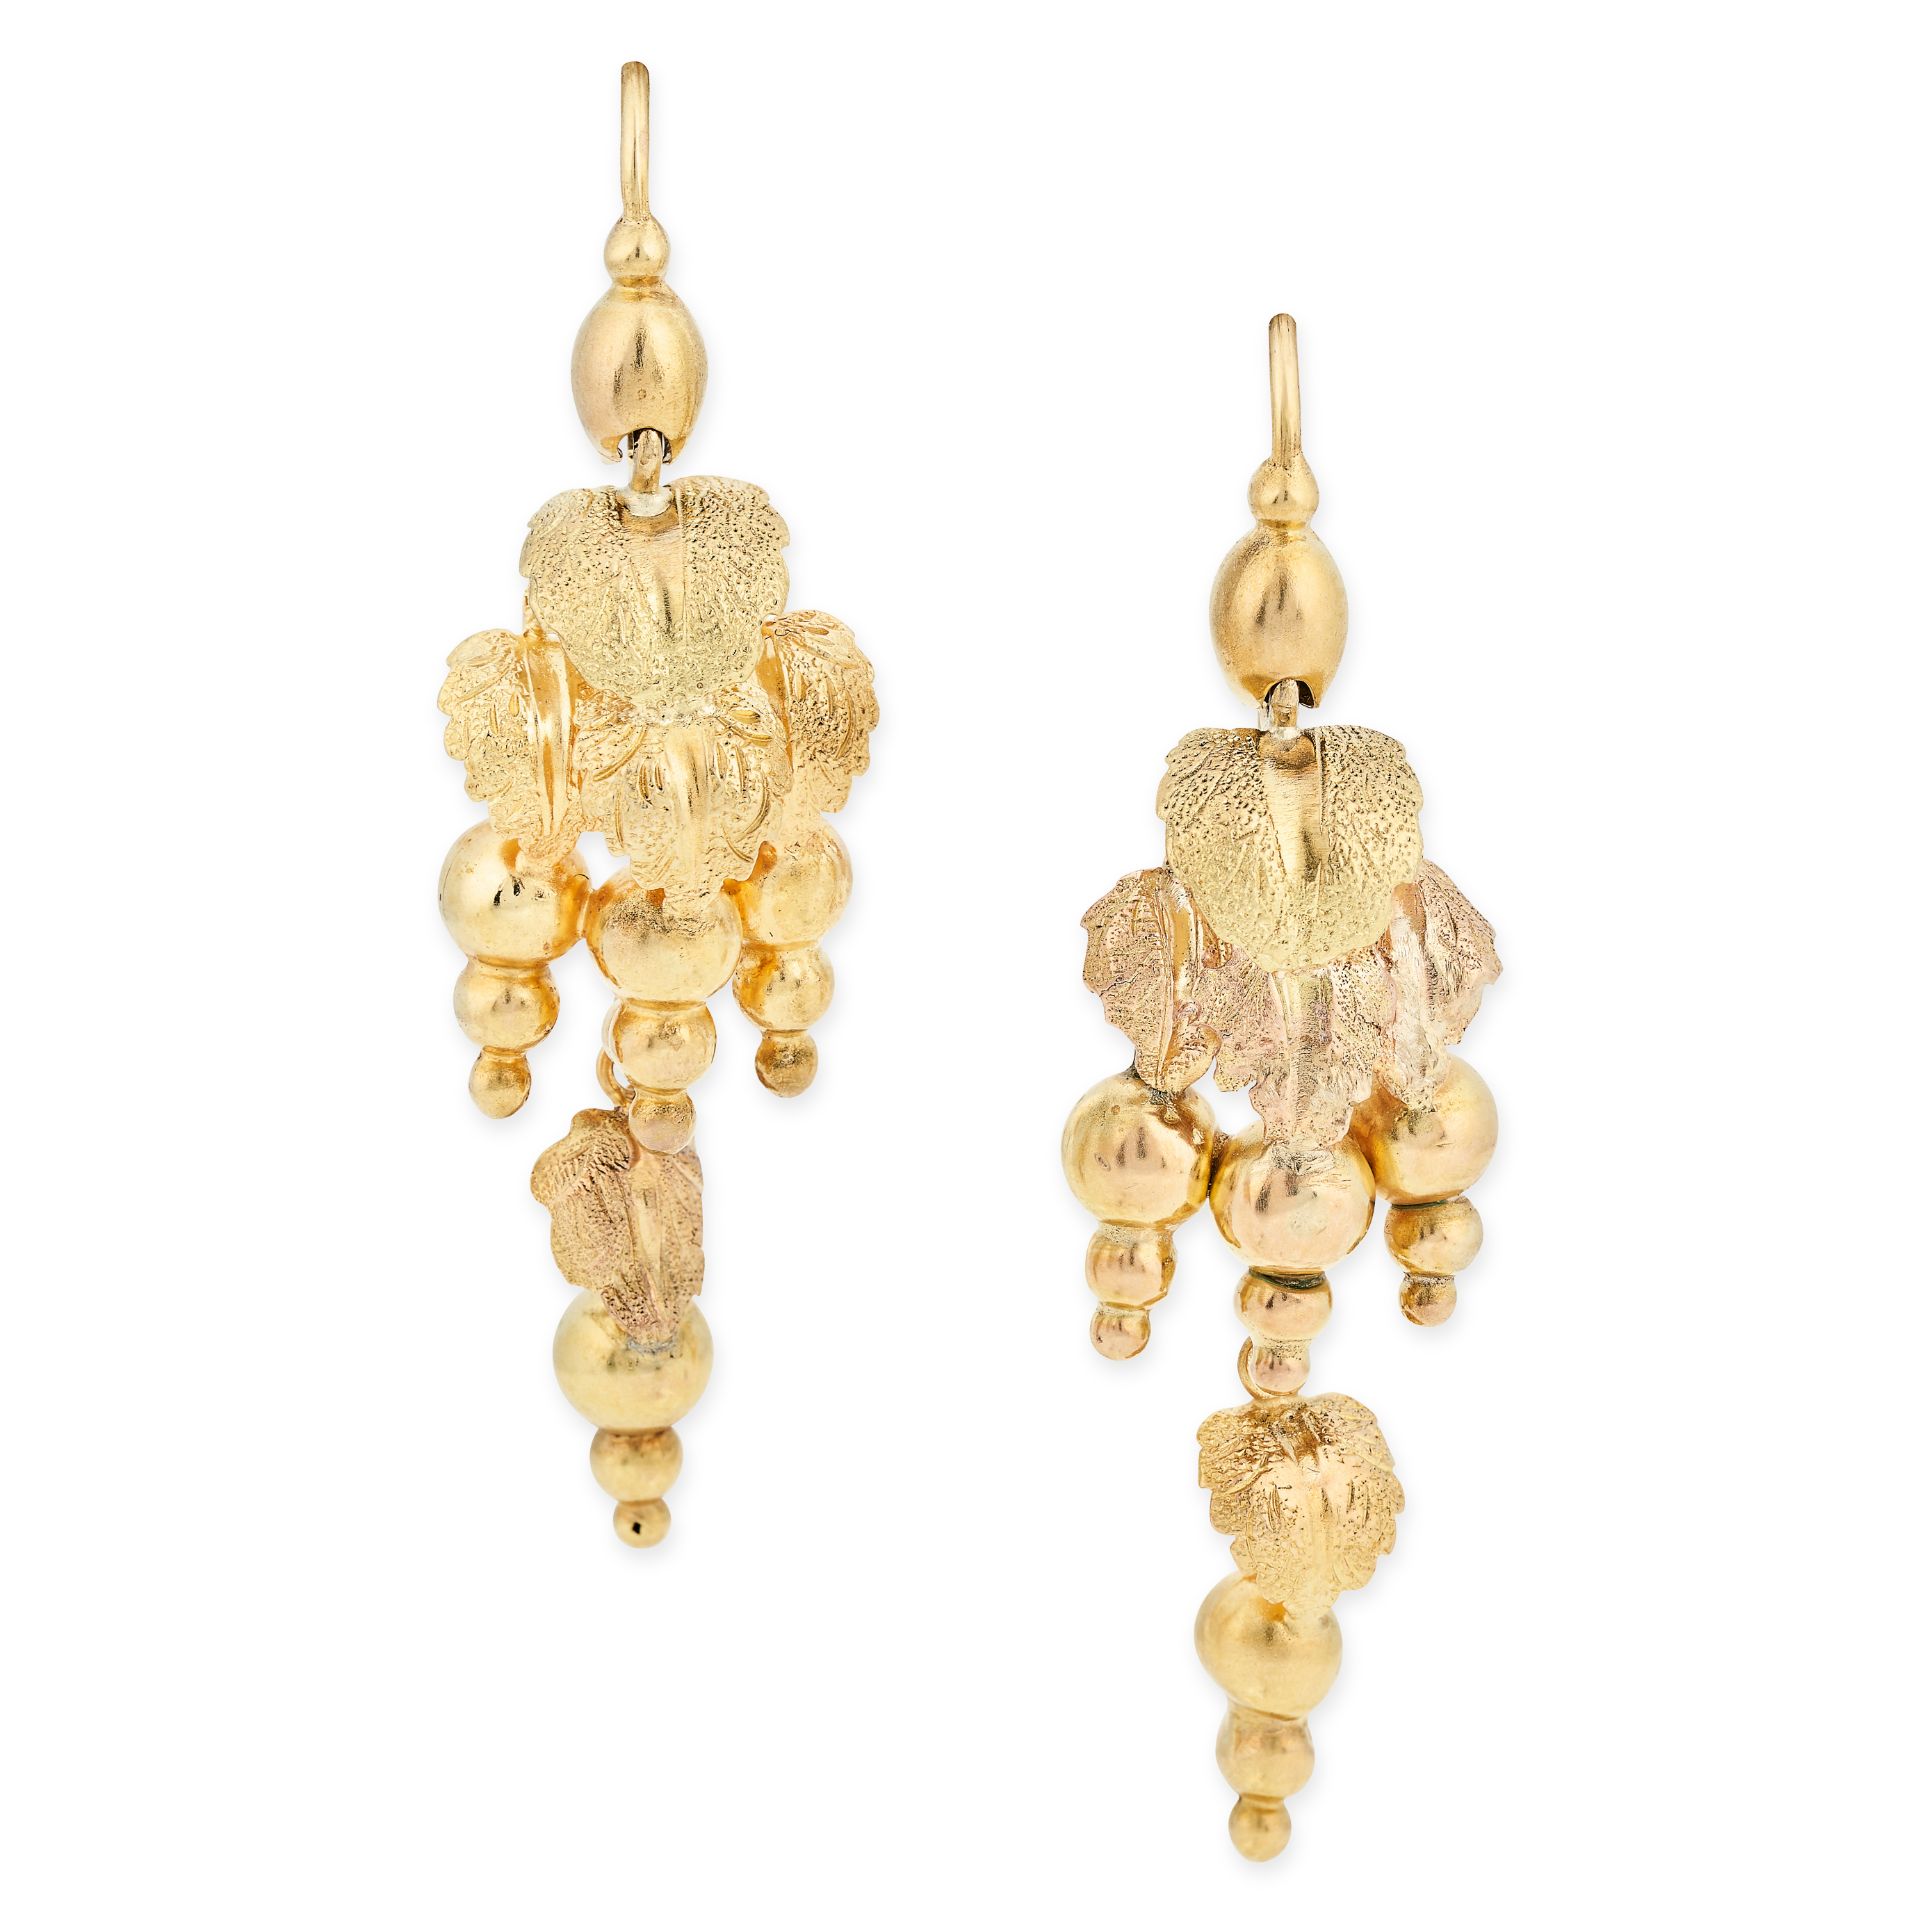 A PAIR OF ANTIQUE GOLD DROP EARRINGS in yellow gold, each designed to depict vine leaves and